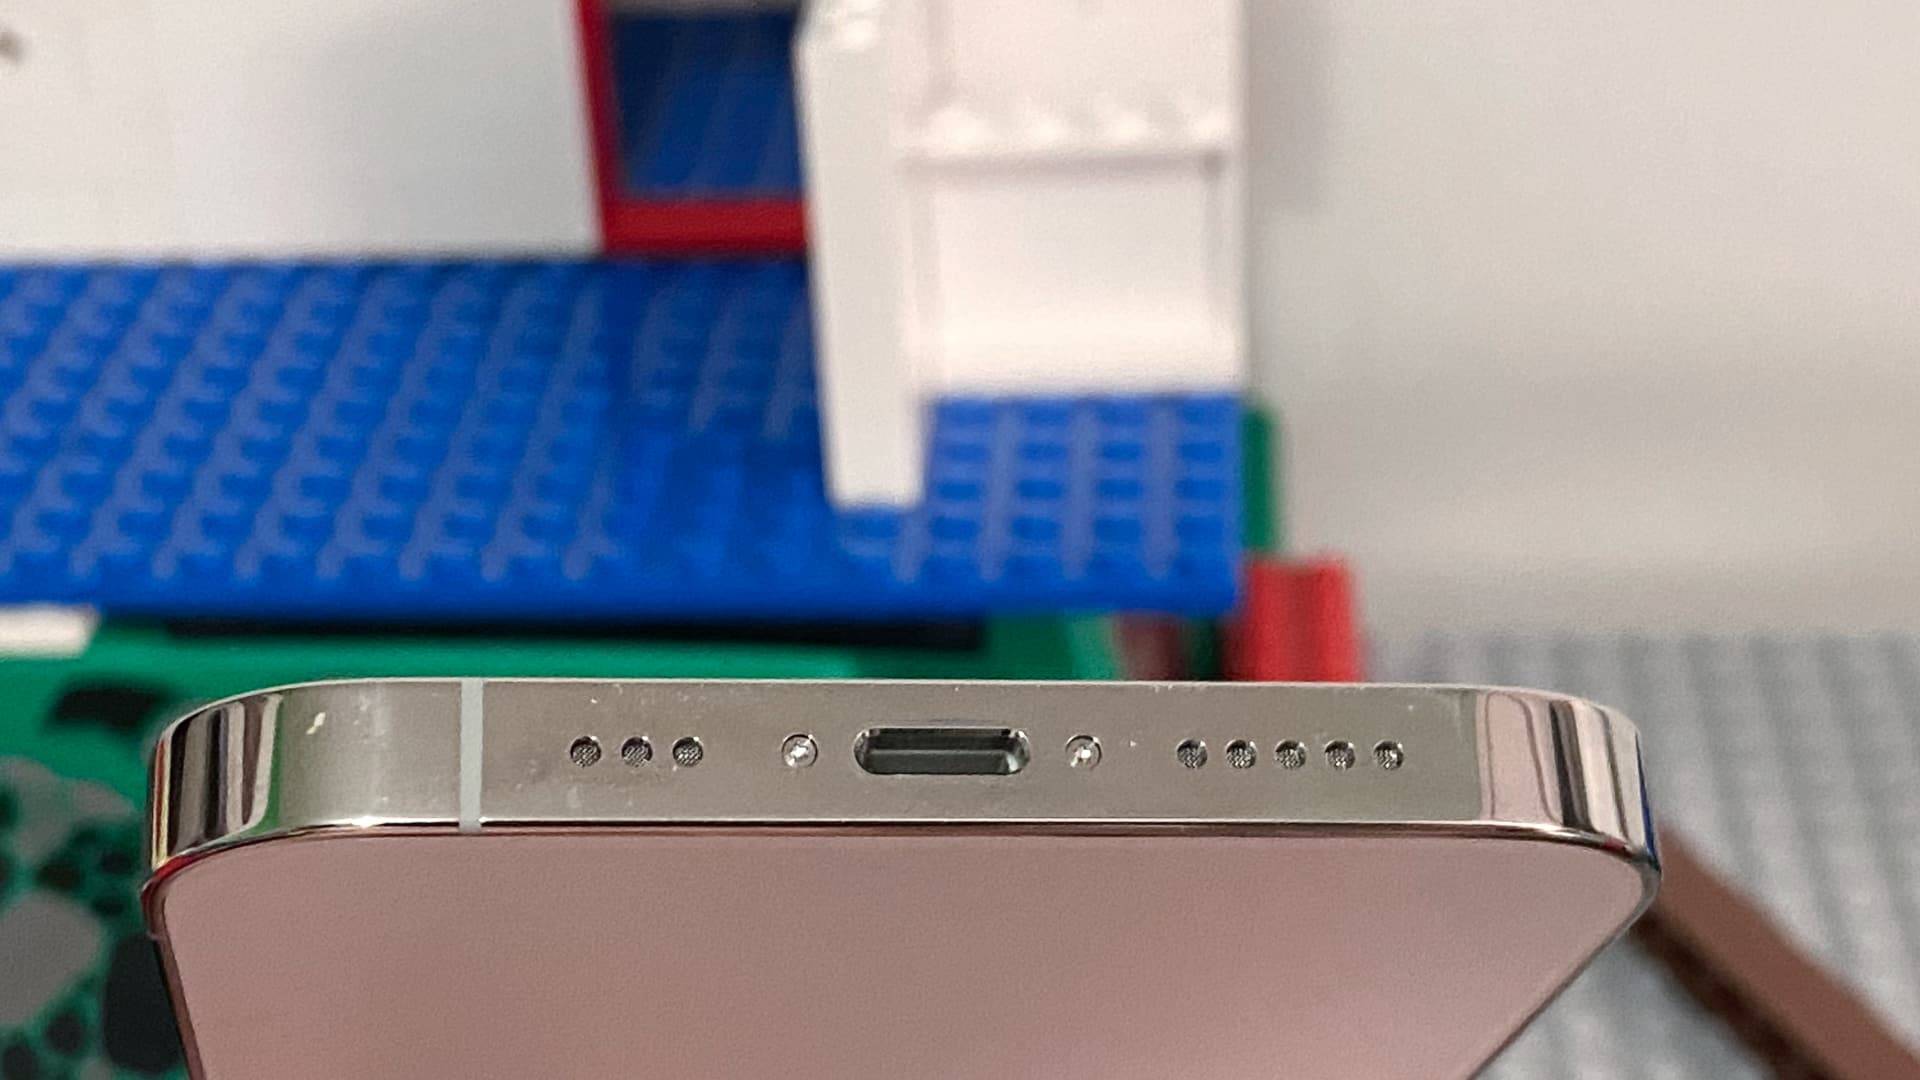 Iphone 12 Pro, Silver, Lego, charging port